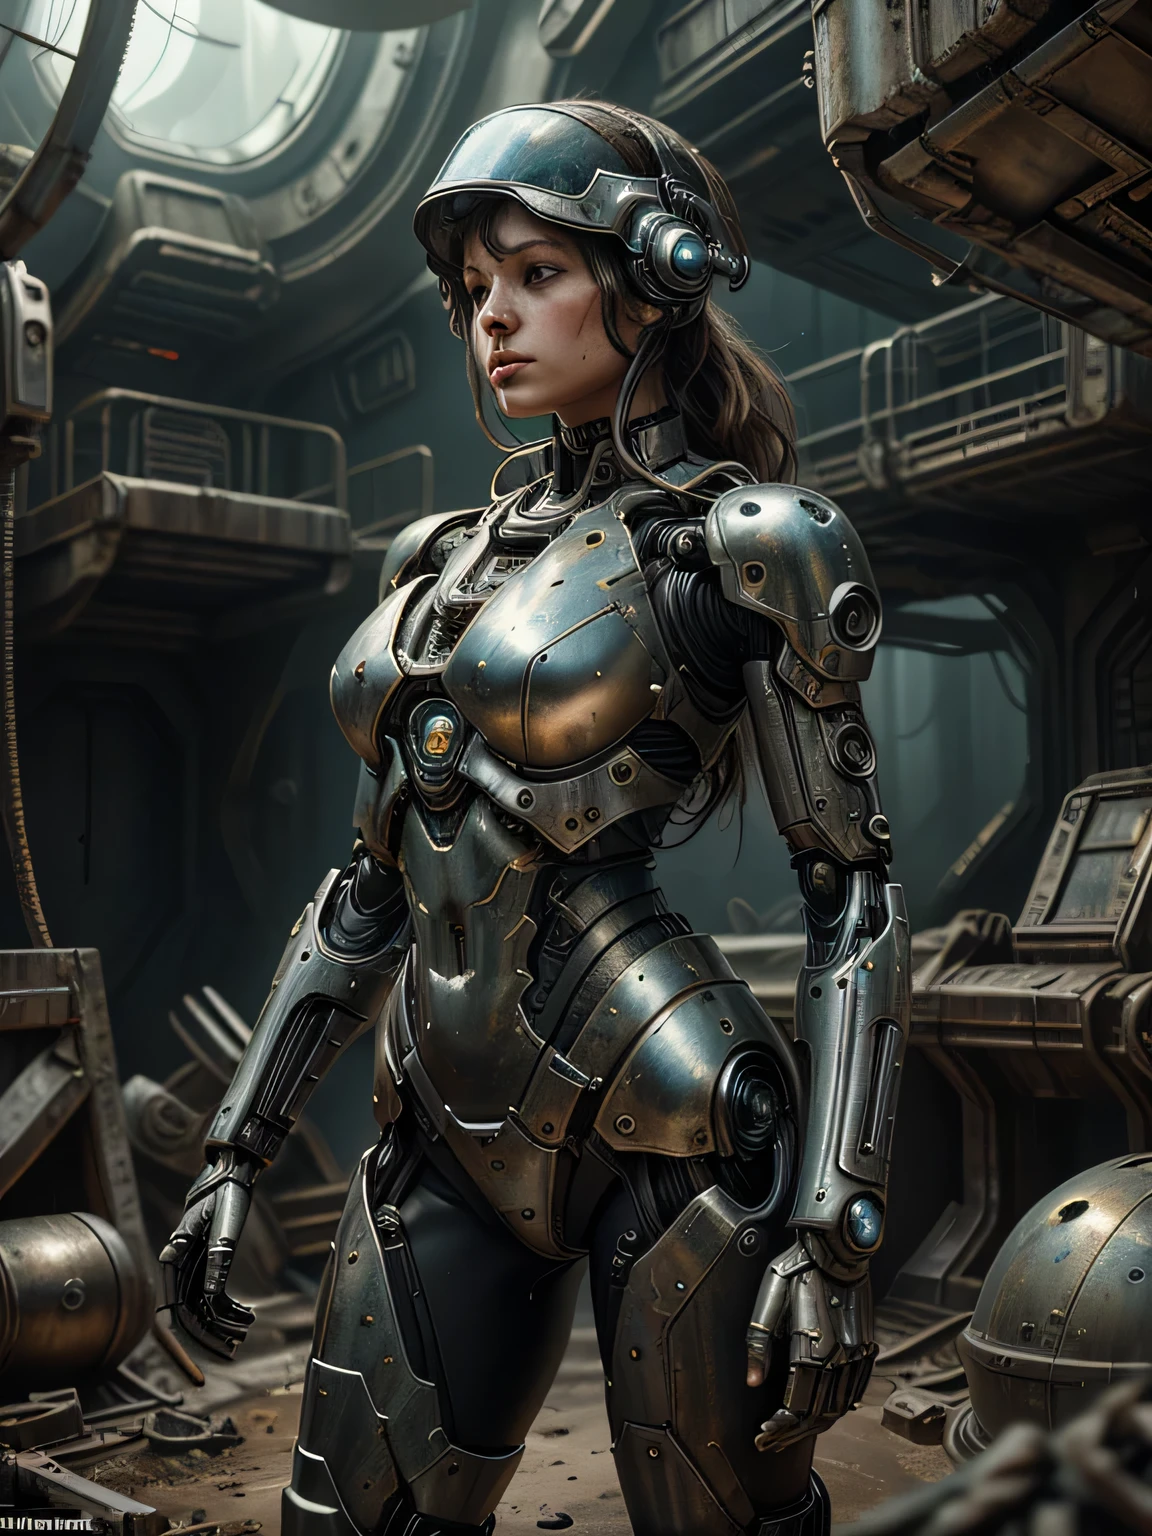 A stranded fully armored female Cyborg Soldier in an abandoned Battle Starship Shipwreck, metal cable wire, circuit cables, dystopian futuristic scene, realistic style in Don Lawrence brush stroke, oil on canvas, octane render with dramatic lighting and strong shadows, her clothing is tattered and worn out, she has a scar or battle wound, she is wearing a futuristic helmet or visor, she has mechanical enhancements like cybernetic eyes, the shipwreck environment feels eerie and desolate, there is some broken machinery or equipment around her, and her expression is determined and battle-worn